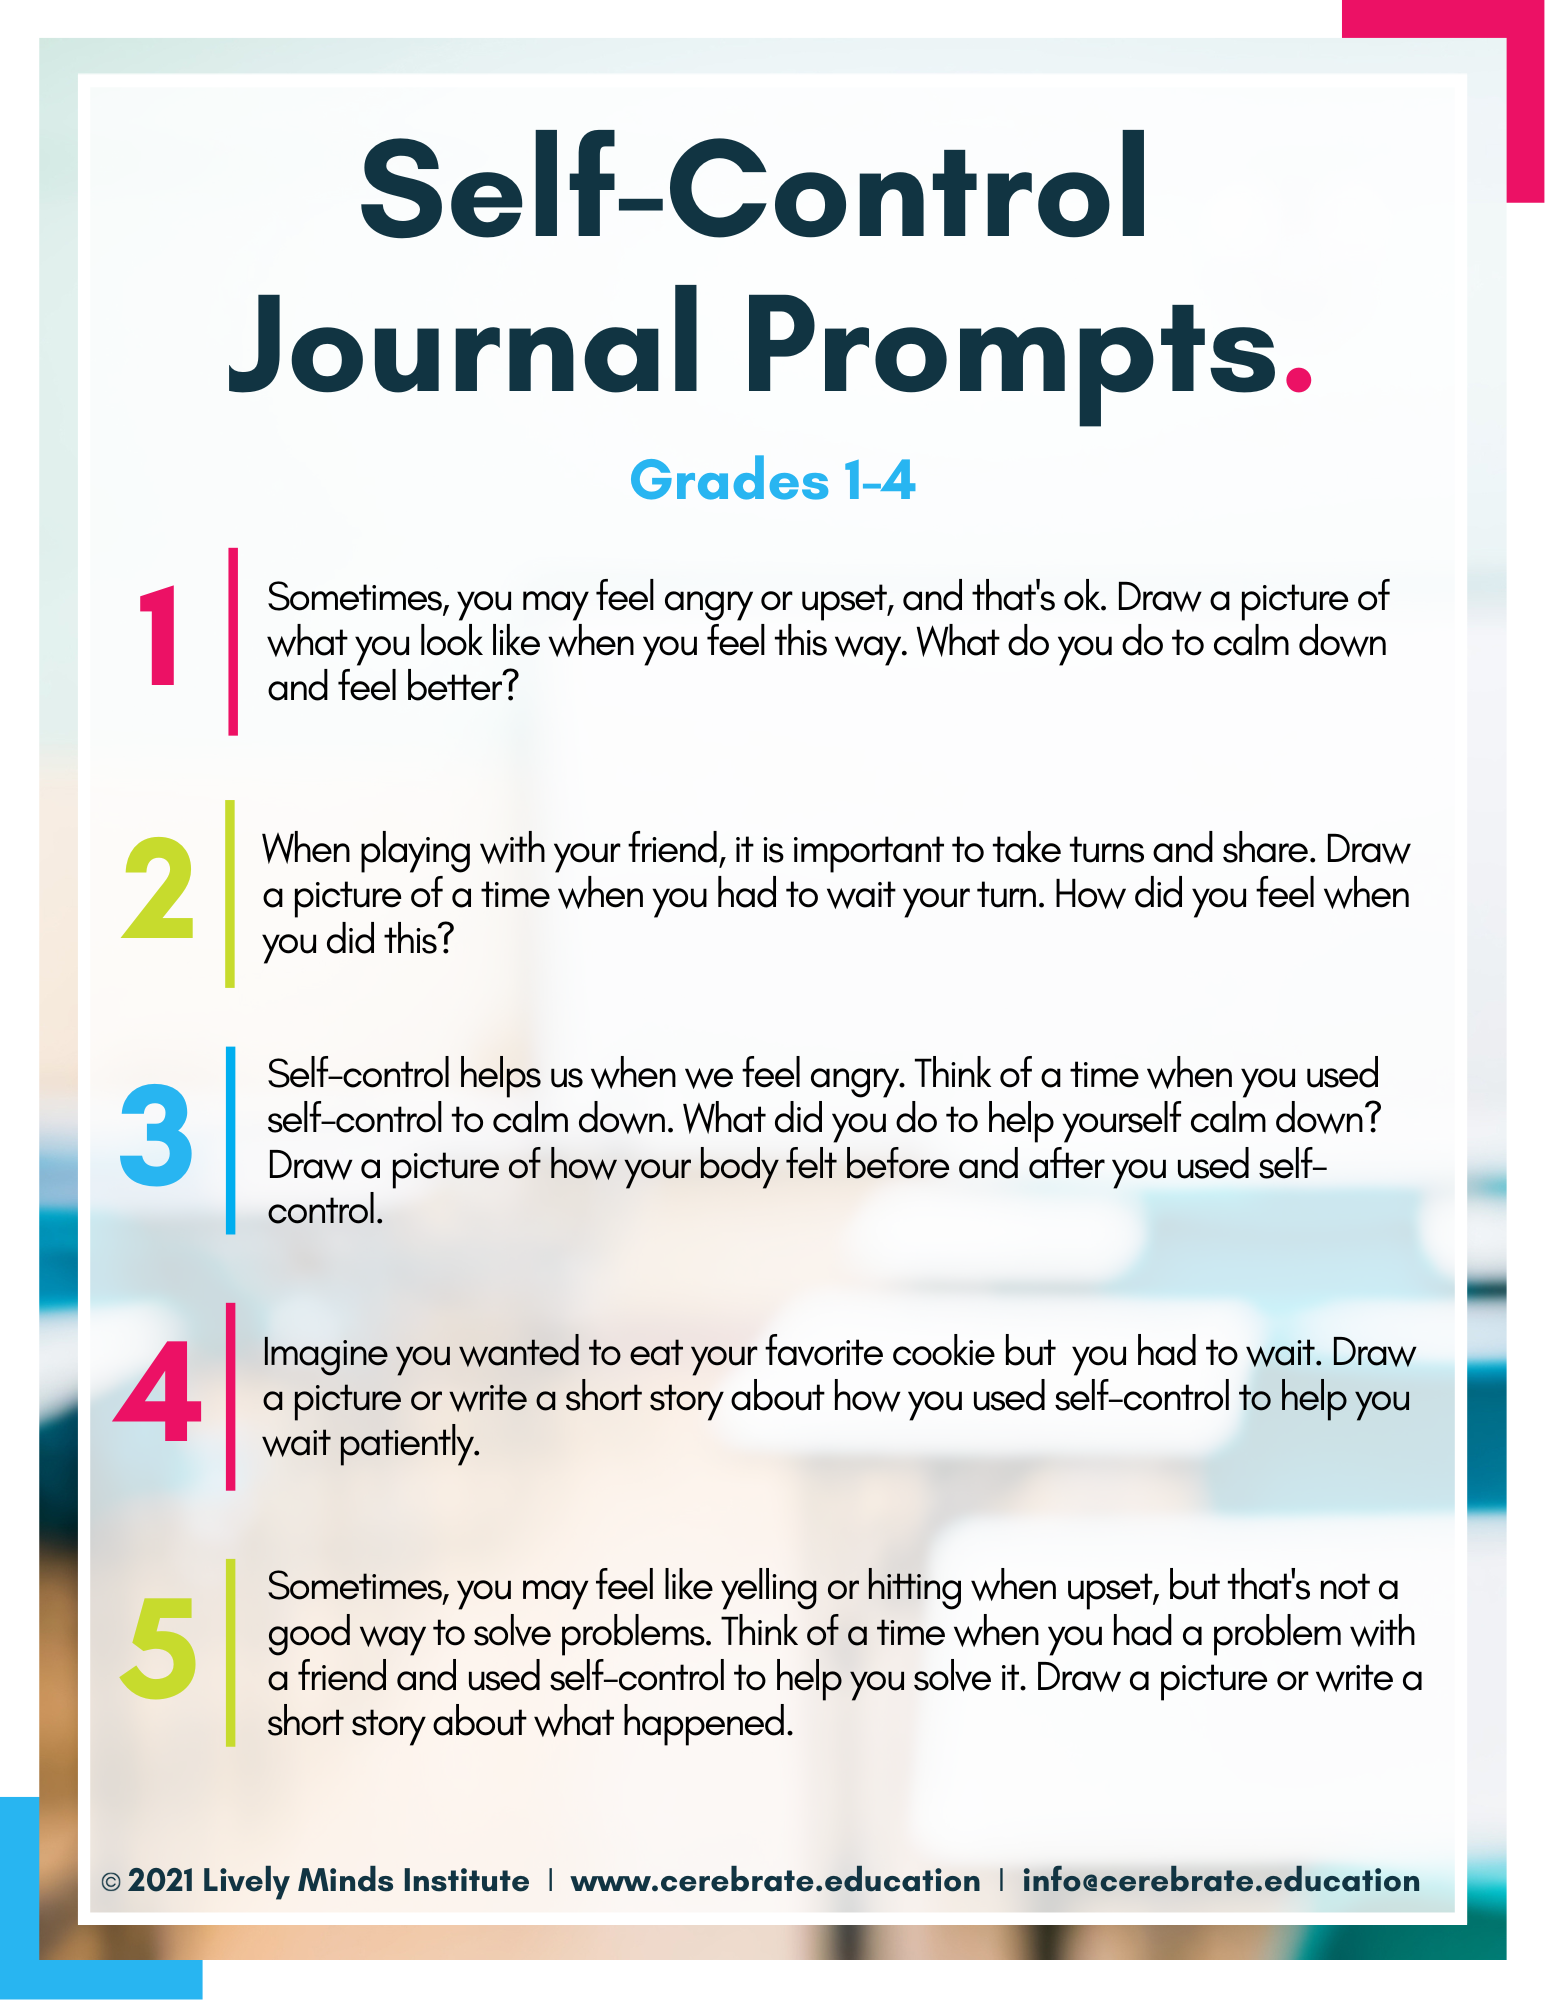 Executive Function Journal Writing Prompts for 1-4